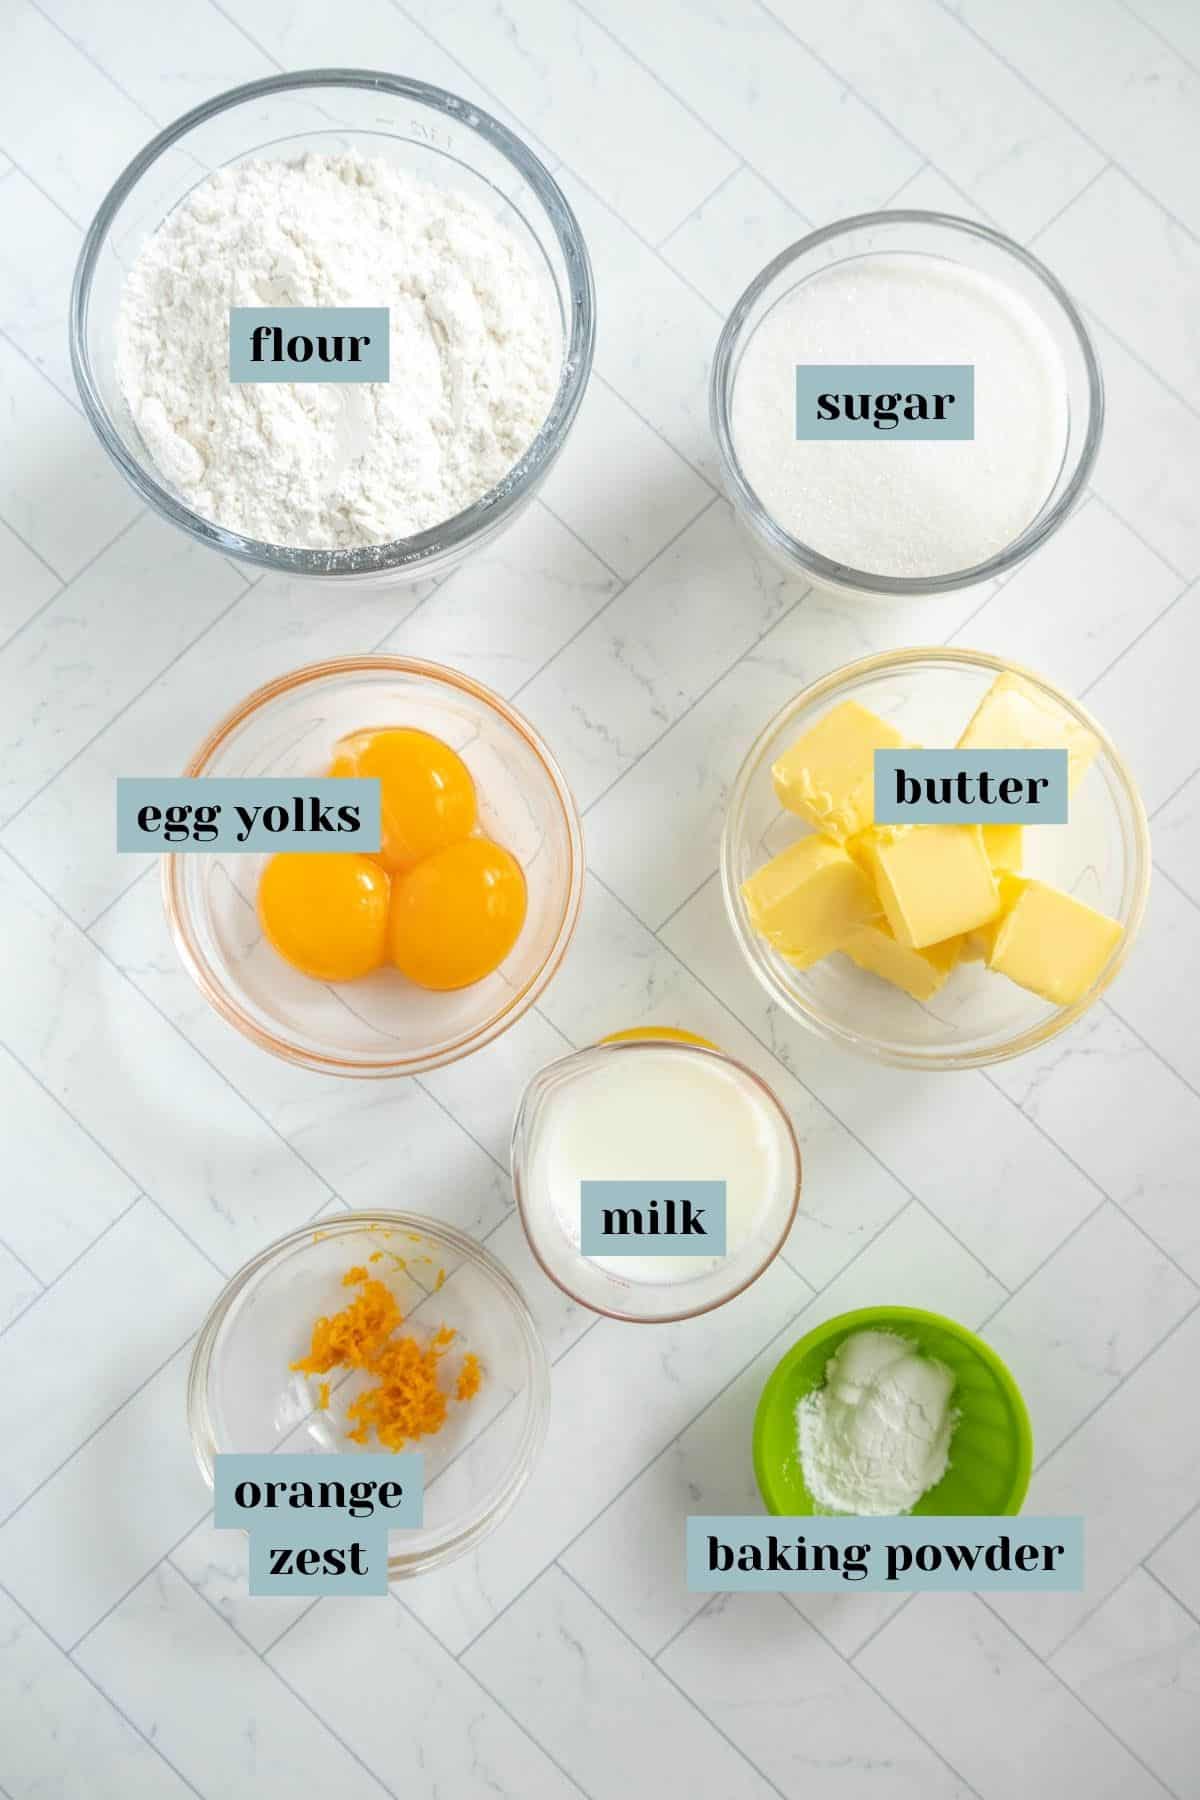 A flat lay of baking ingredients in bowls on a white surface, including flour, sugar, egg yolks, butter, milk, baking powder, and orange zest.